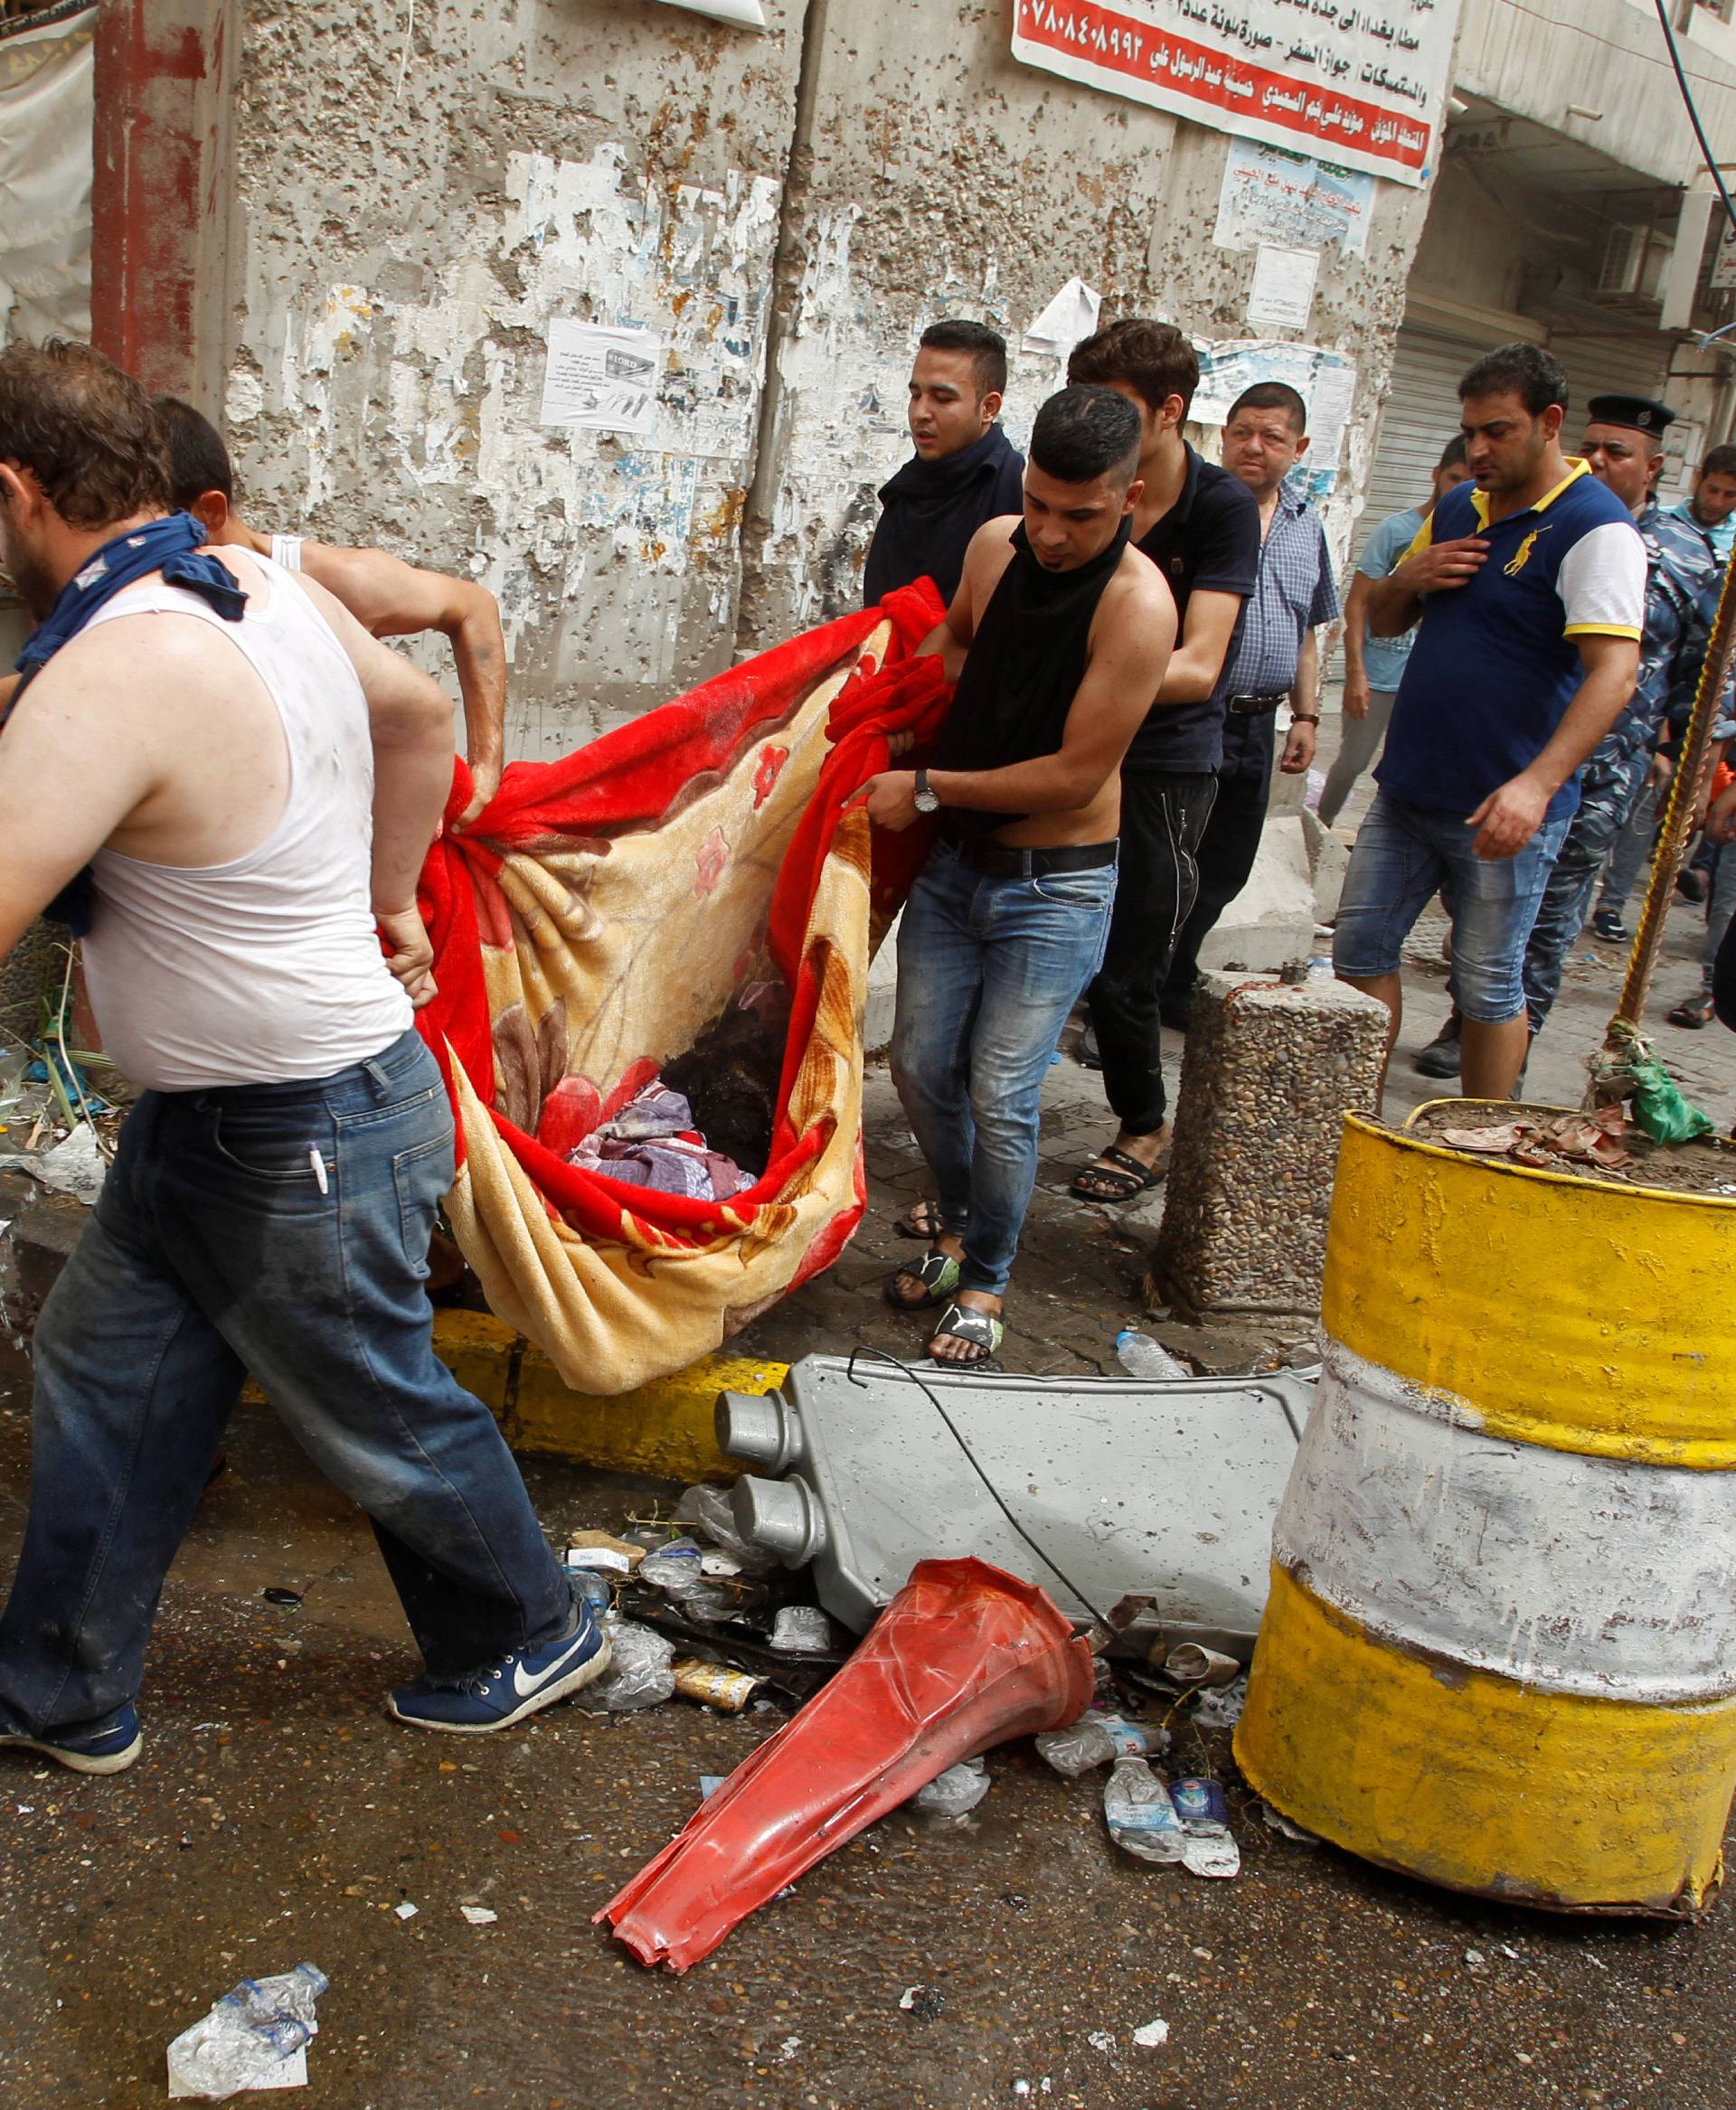 Civilians carry the body of a victim killed in a suicide car bomb in the Karrada shopping area, in Baghdad, Iraq 